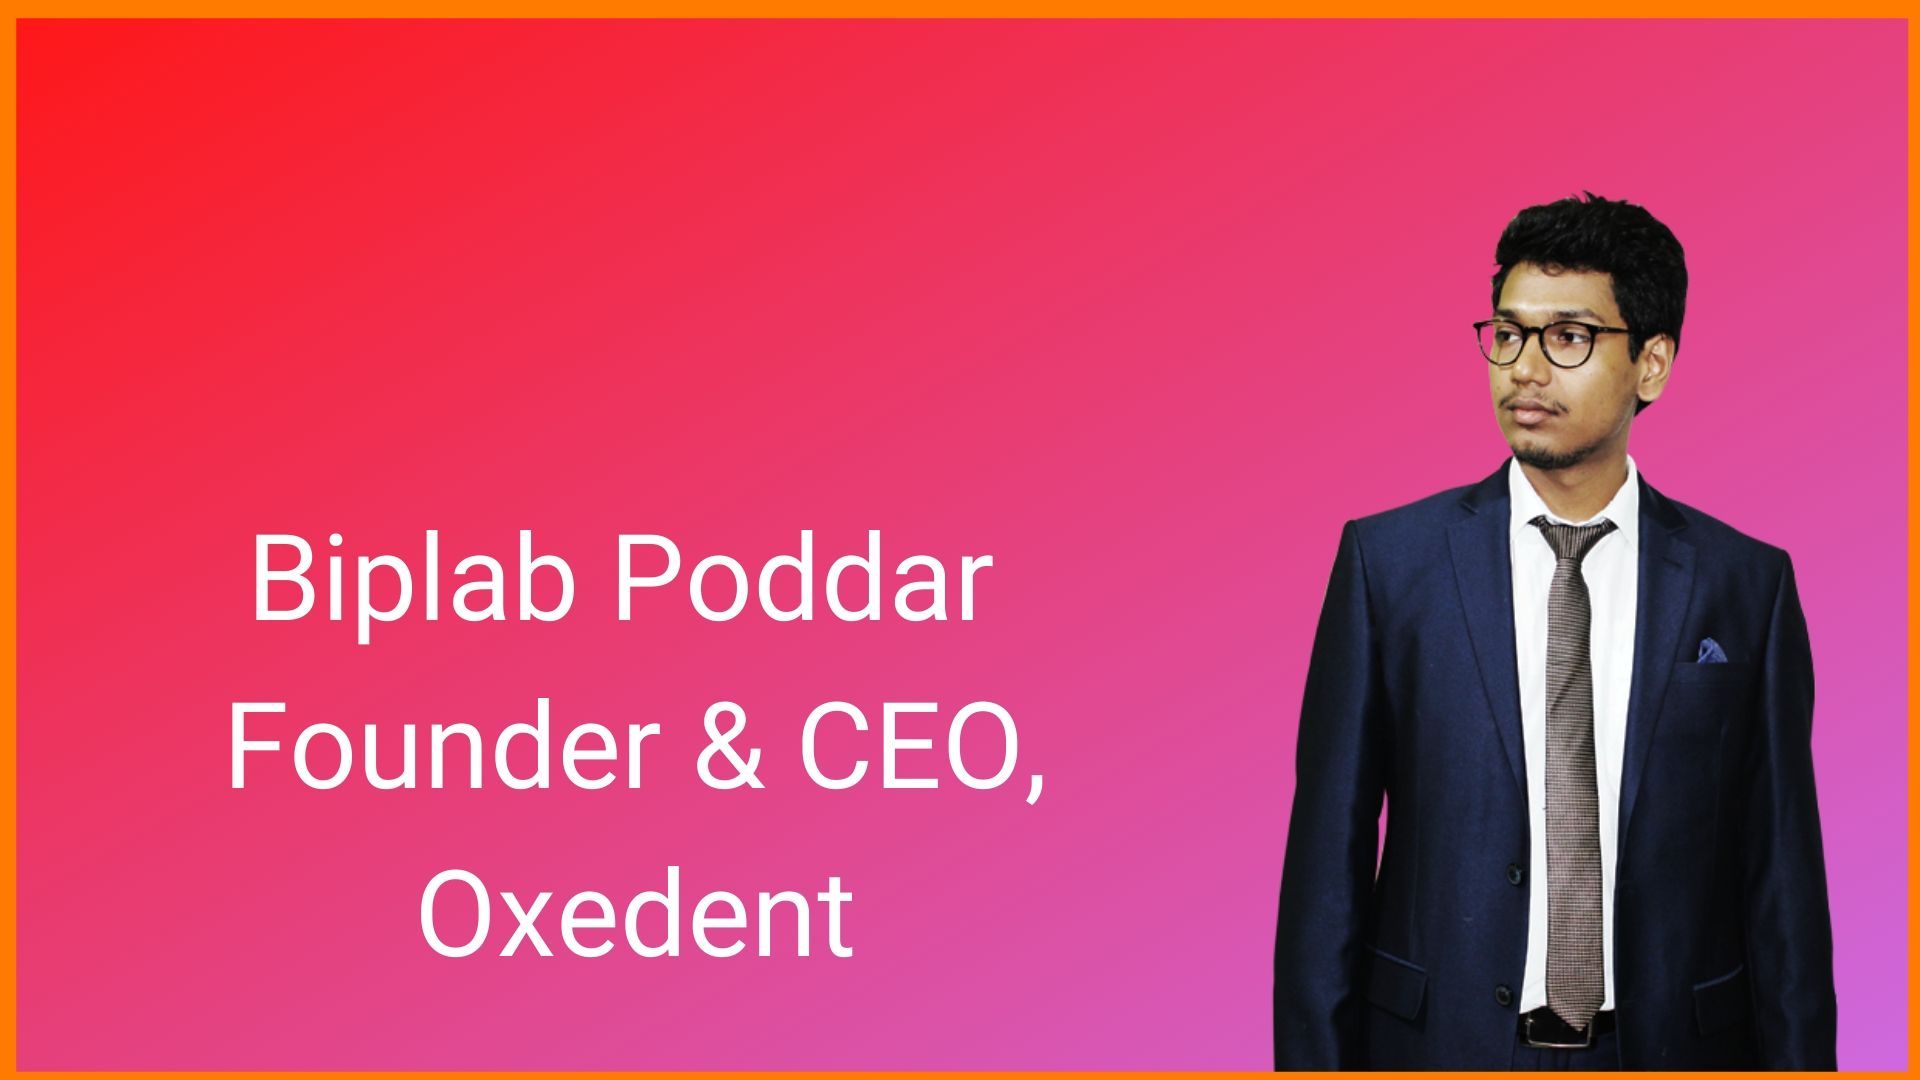 Founder of Oxedent